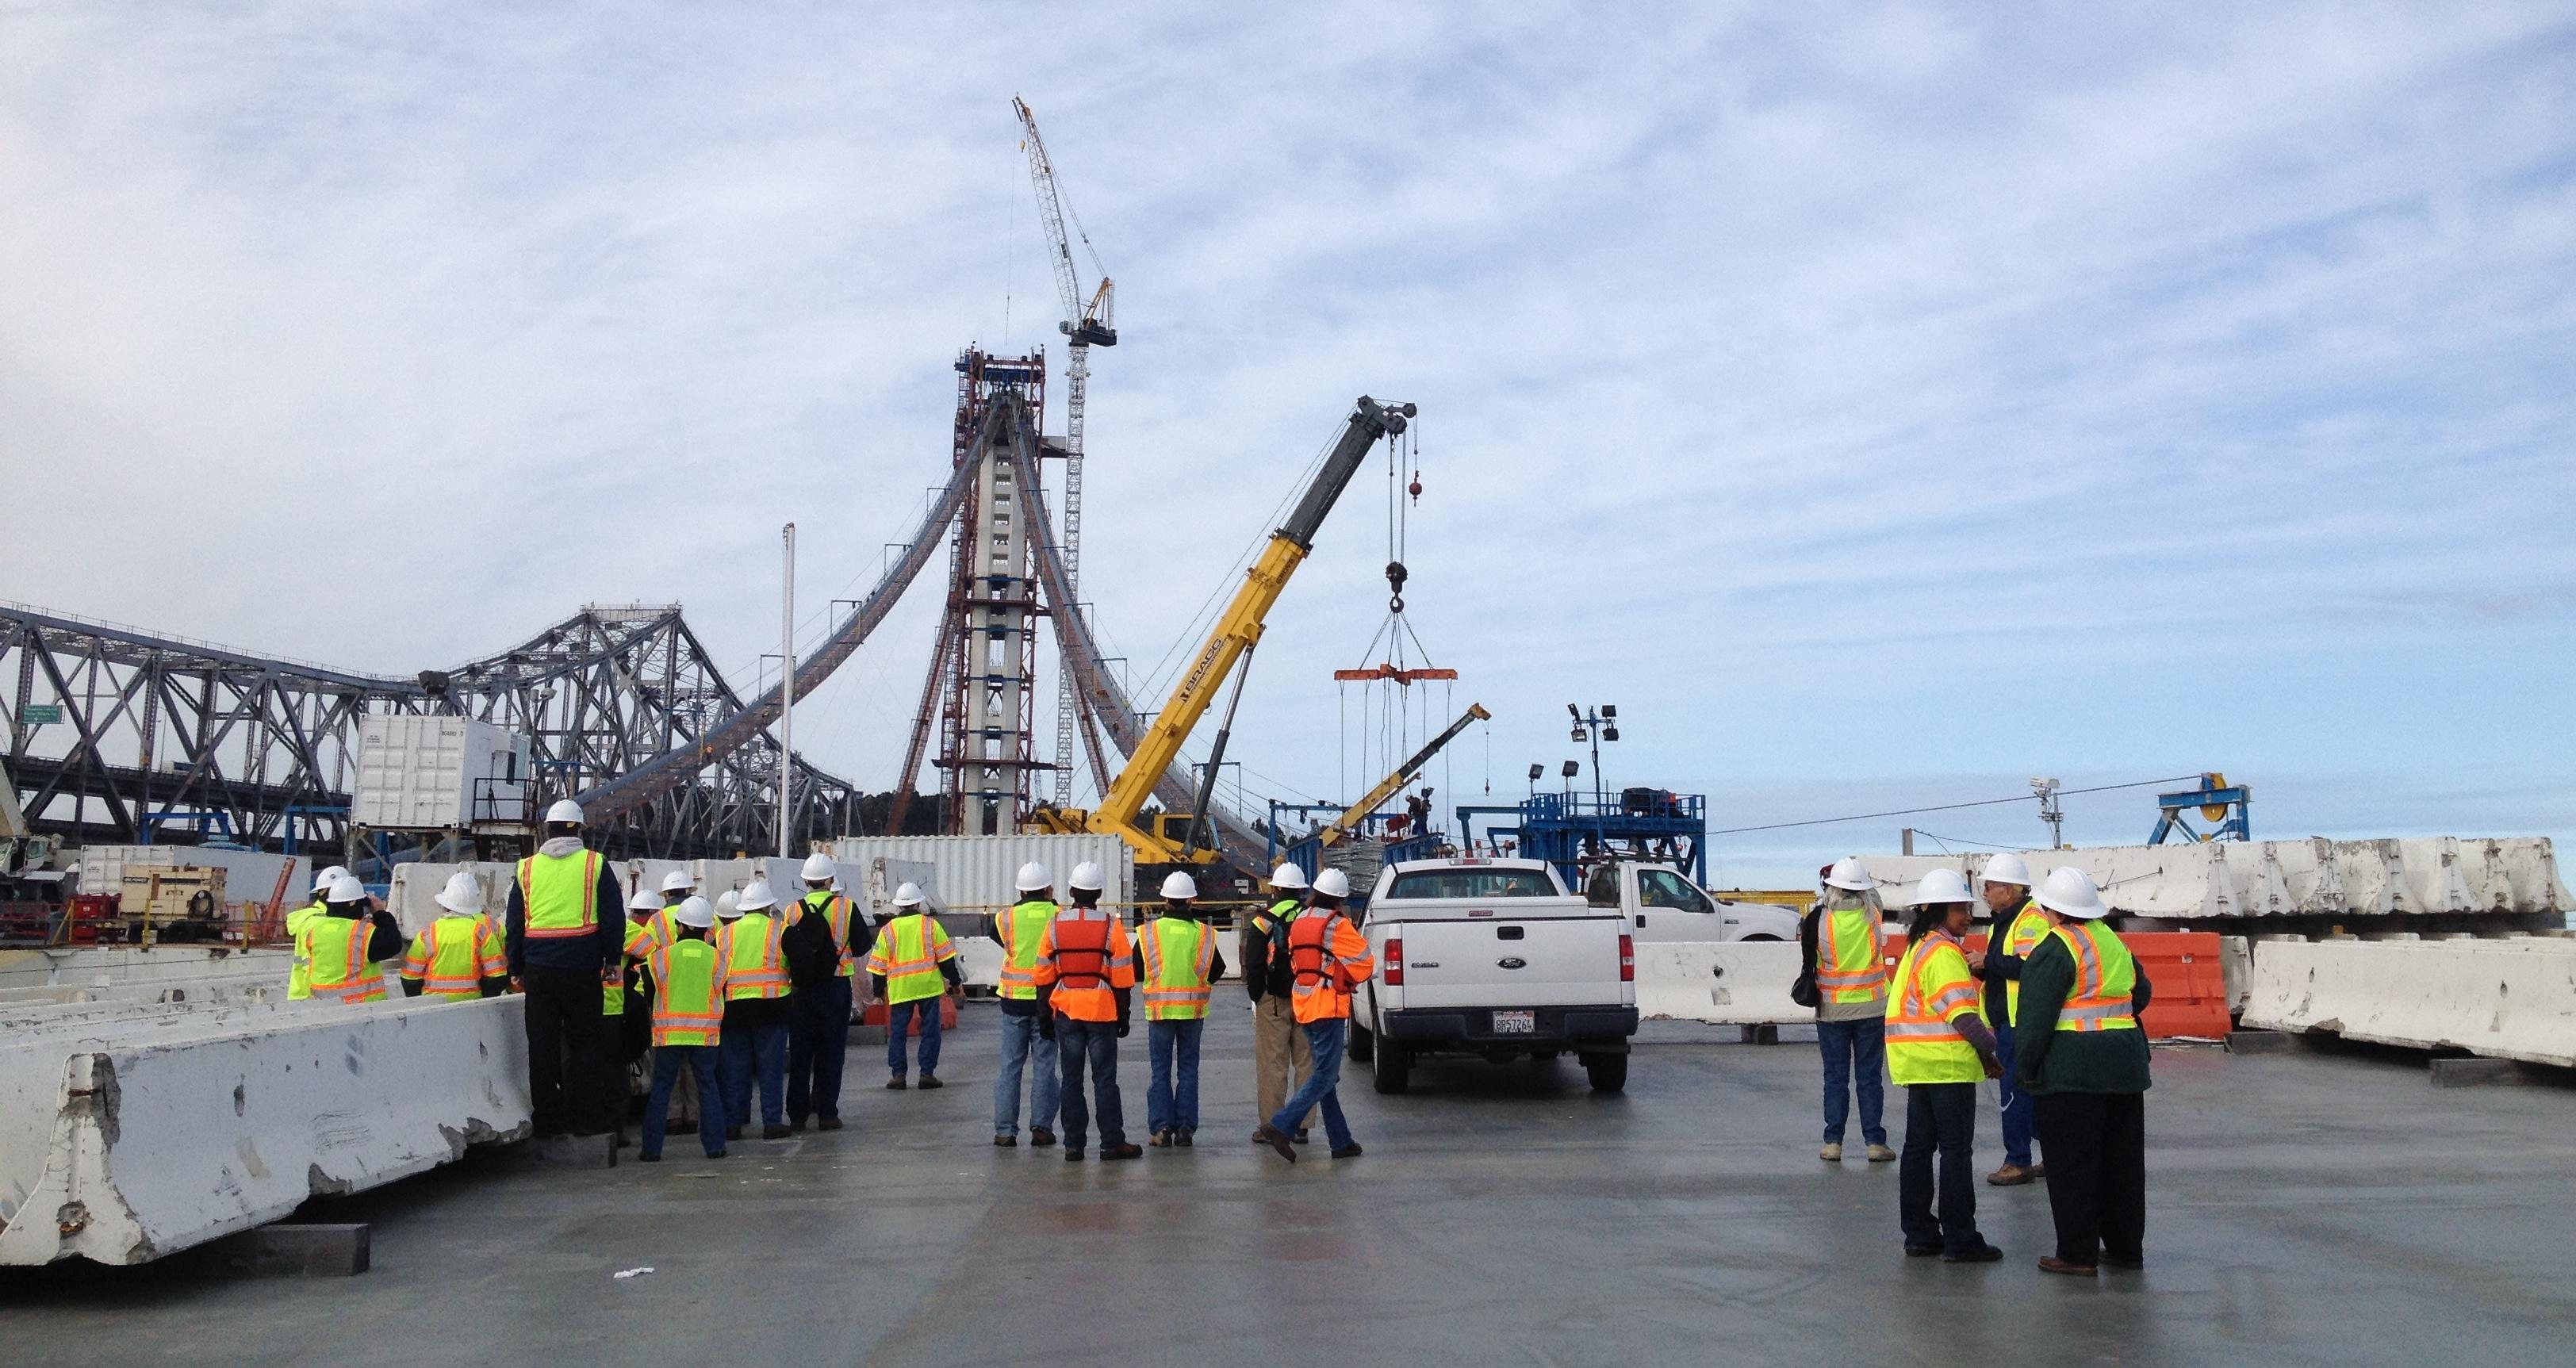 A group of retirees standing on the new Bay Bridge while it was under construction